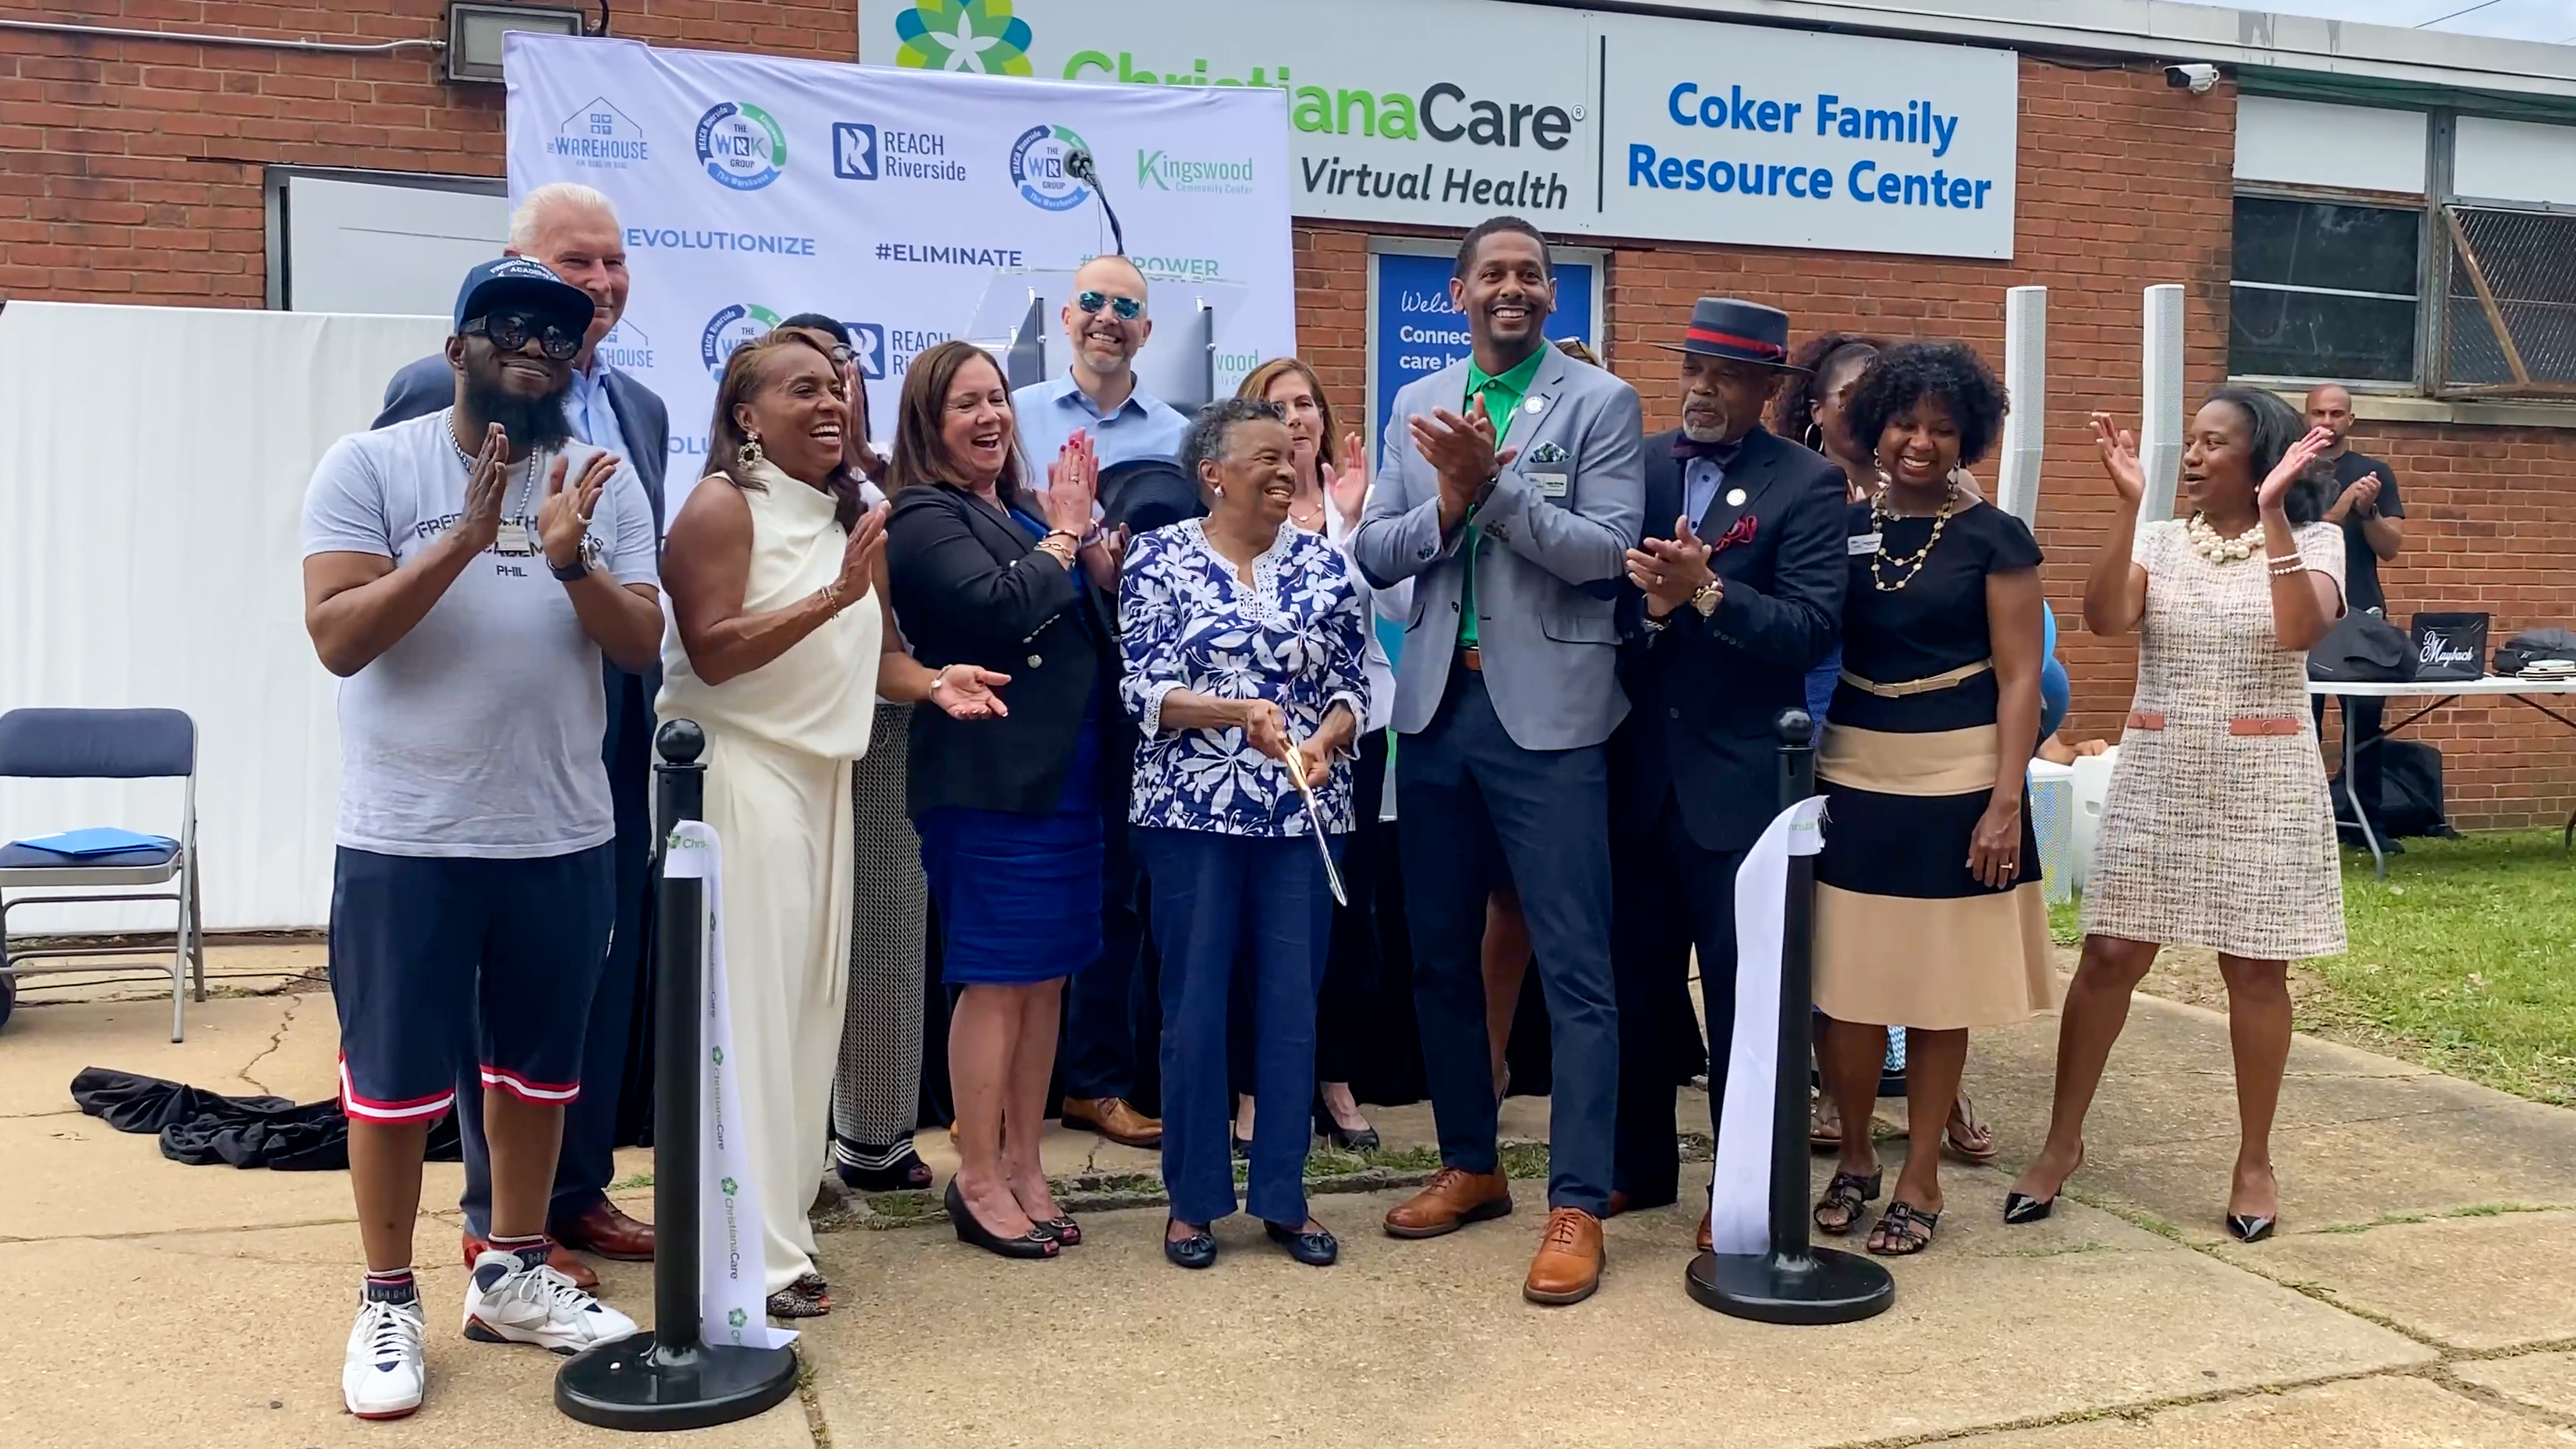 Christianacare Virtual Health Opens At Kingswood Community Center In Wilmington Christianacare News